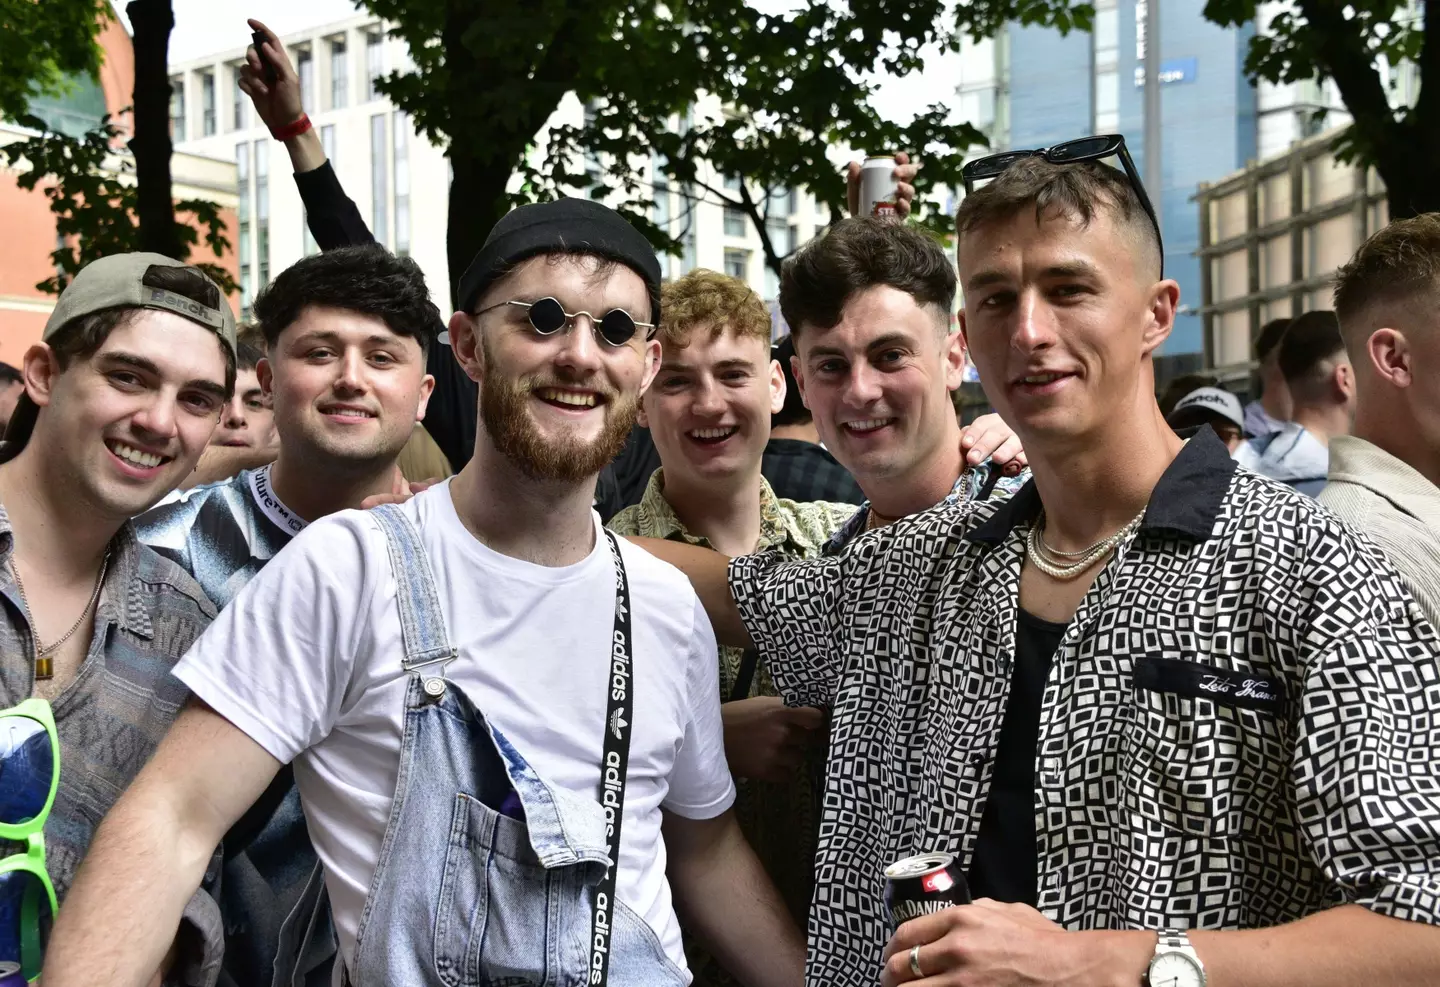 LADbible has spoken to audience members at the site about their go-to protocol when it comes to sticking together with friends at festivals.